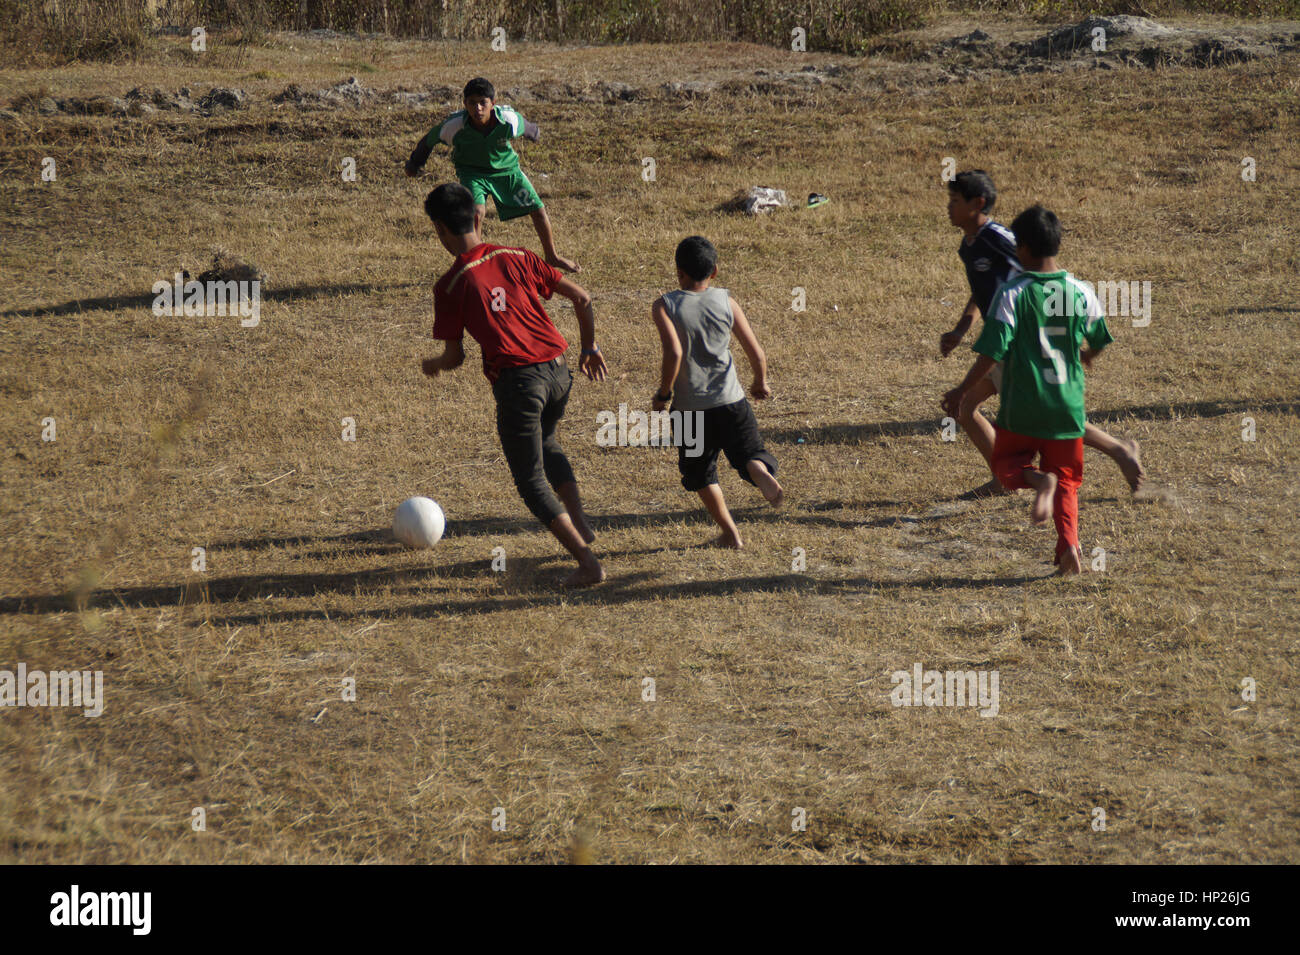 Football in third world country Stock Photo